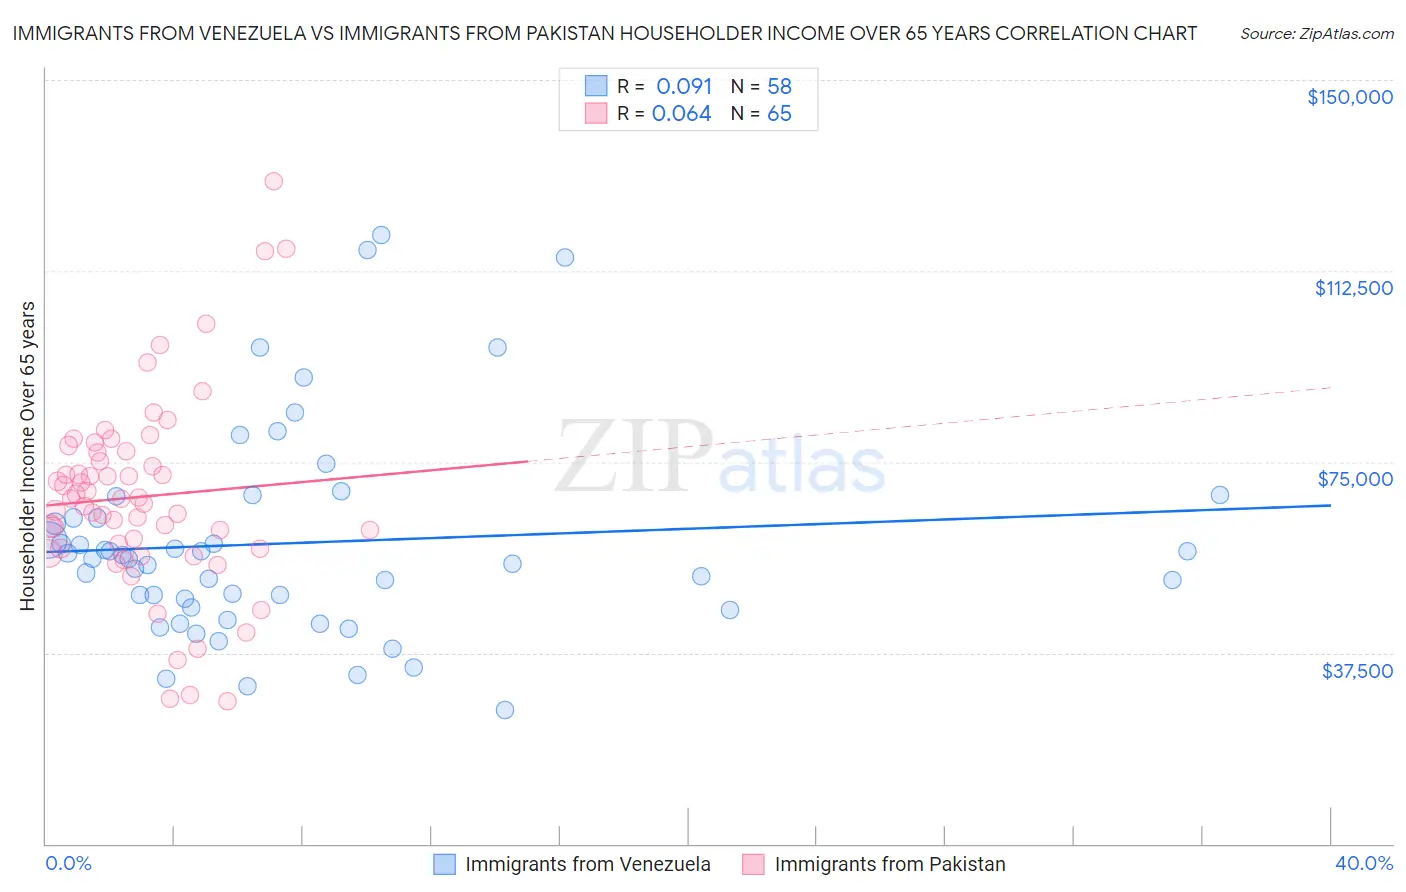 Immigrants from Venezuela vs Immigrants from Pakistan Householder Income Over 65 years